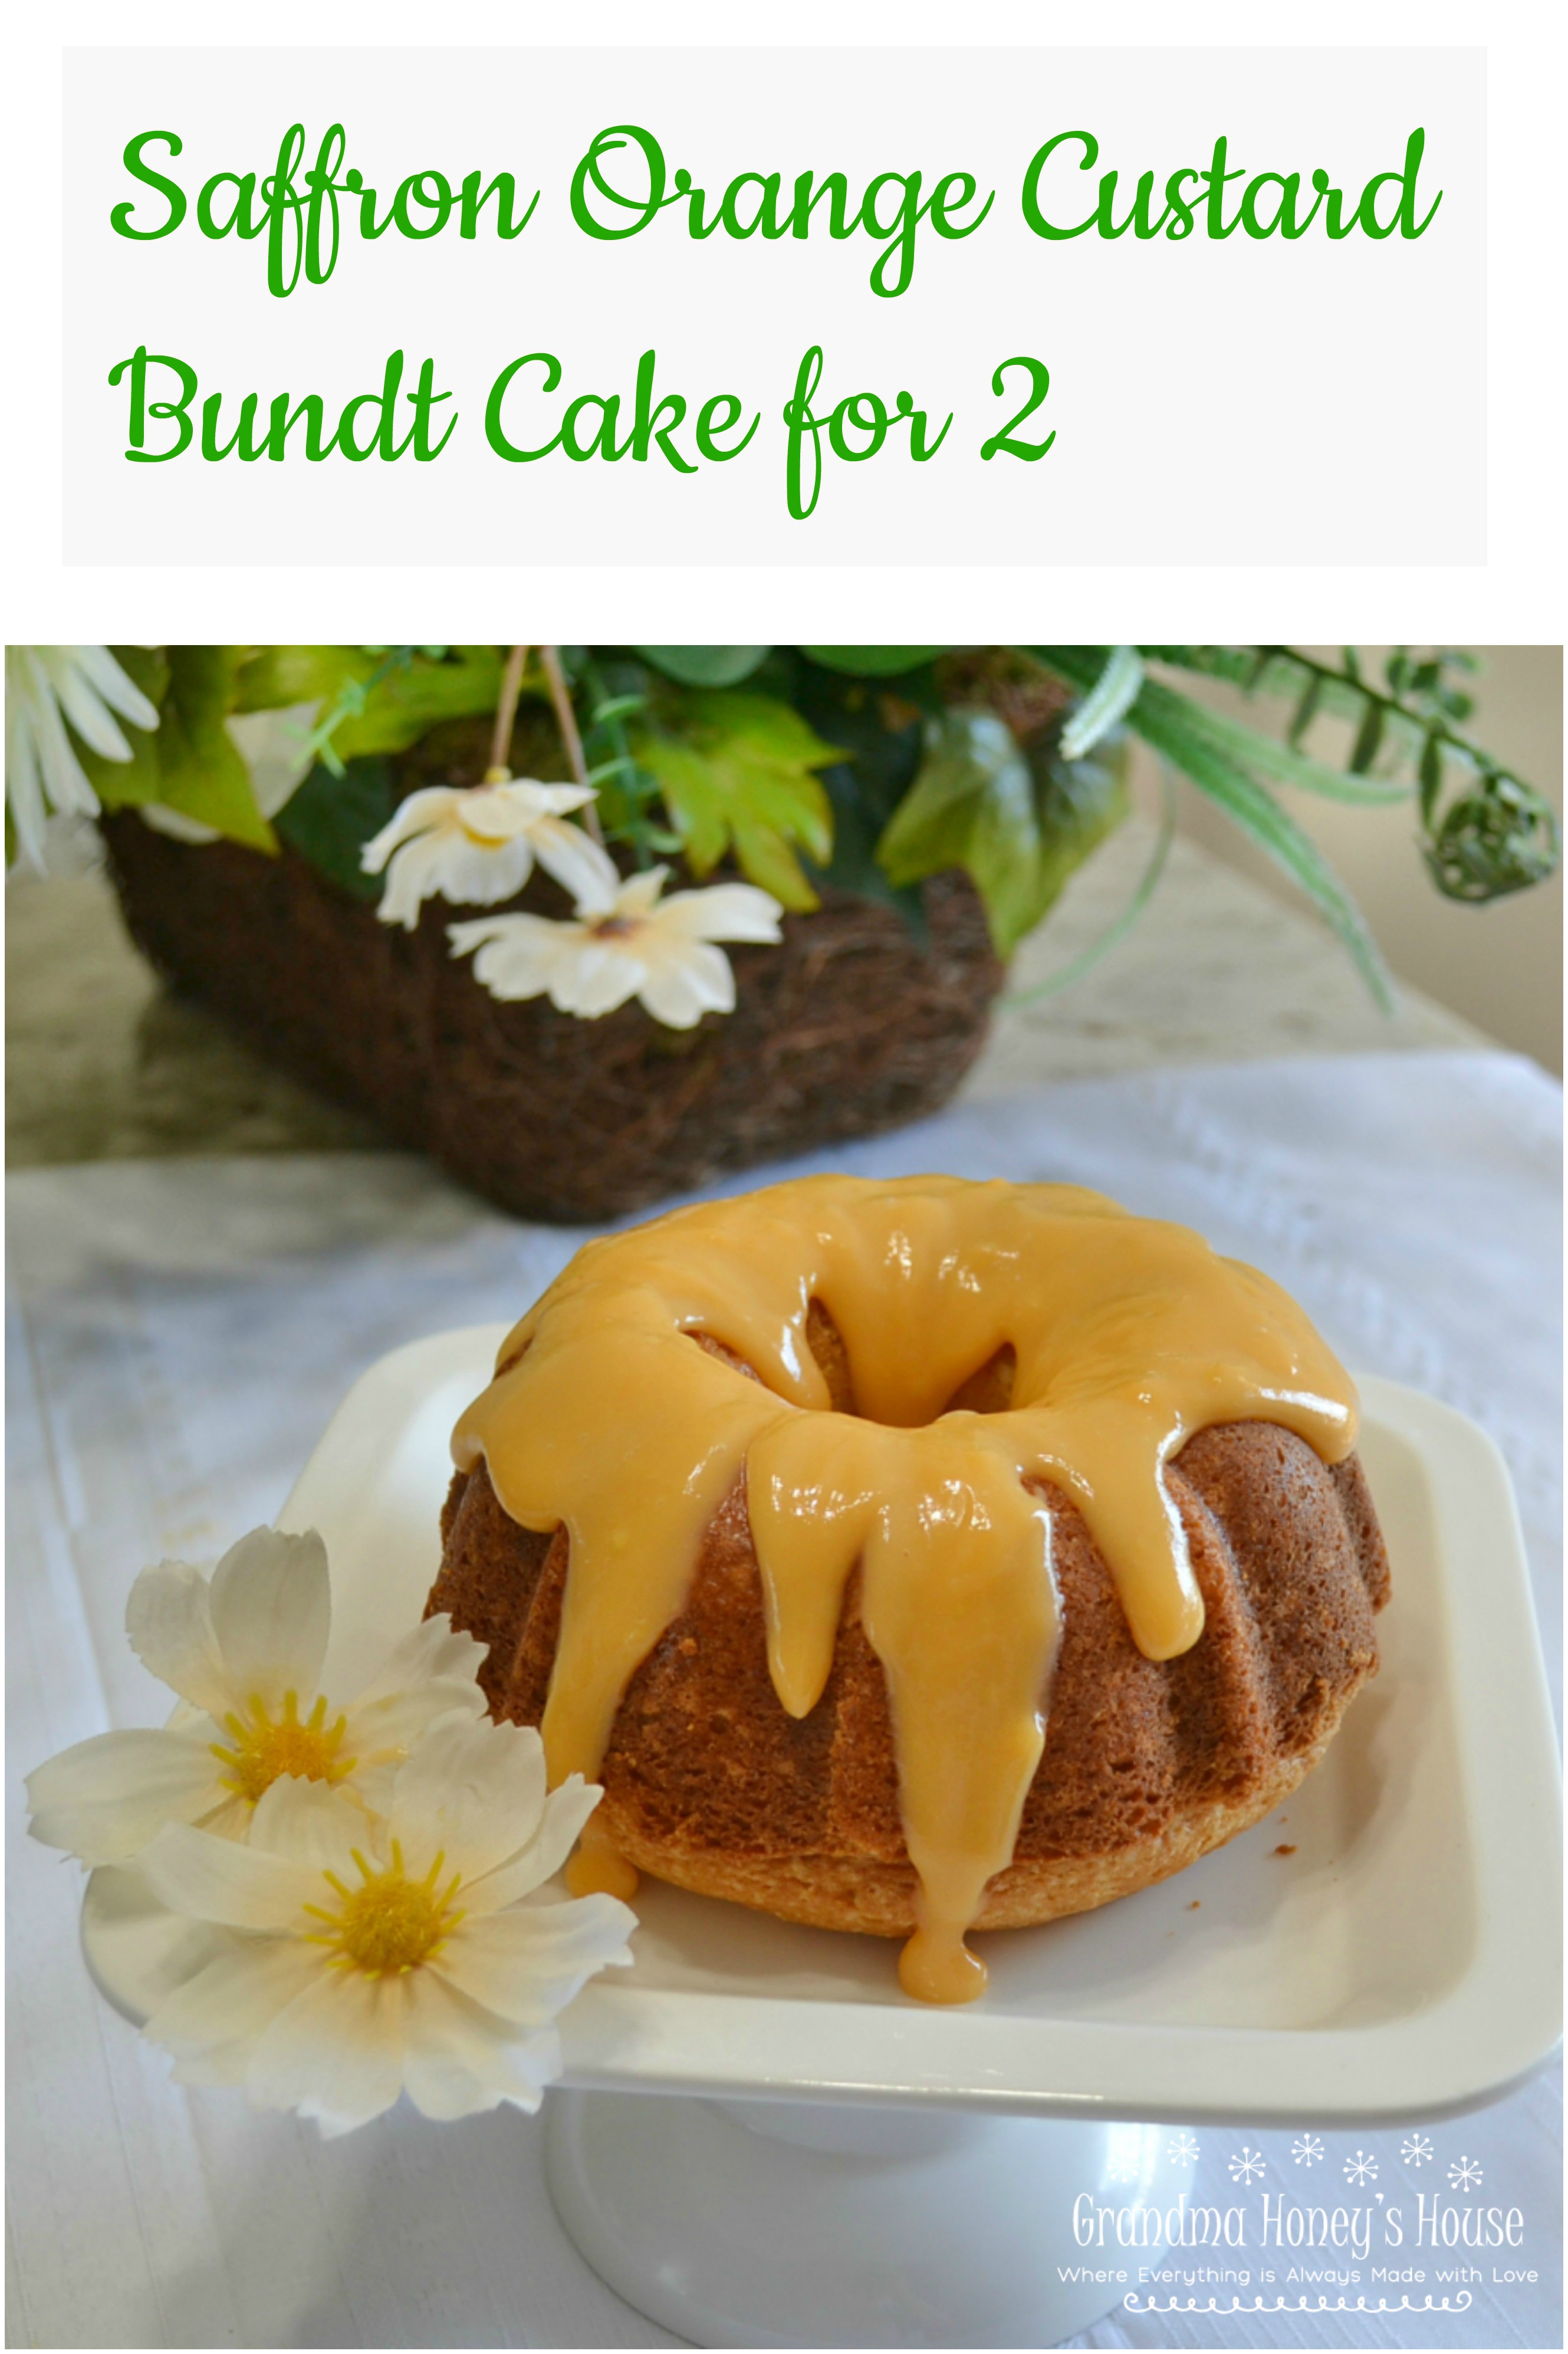 Saffron Orange Custard Bundt Cake for 2 is a scaled down cake perfect for any special occassion.